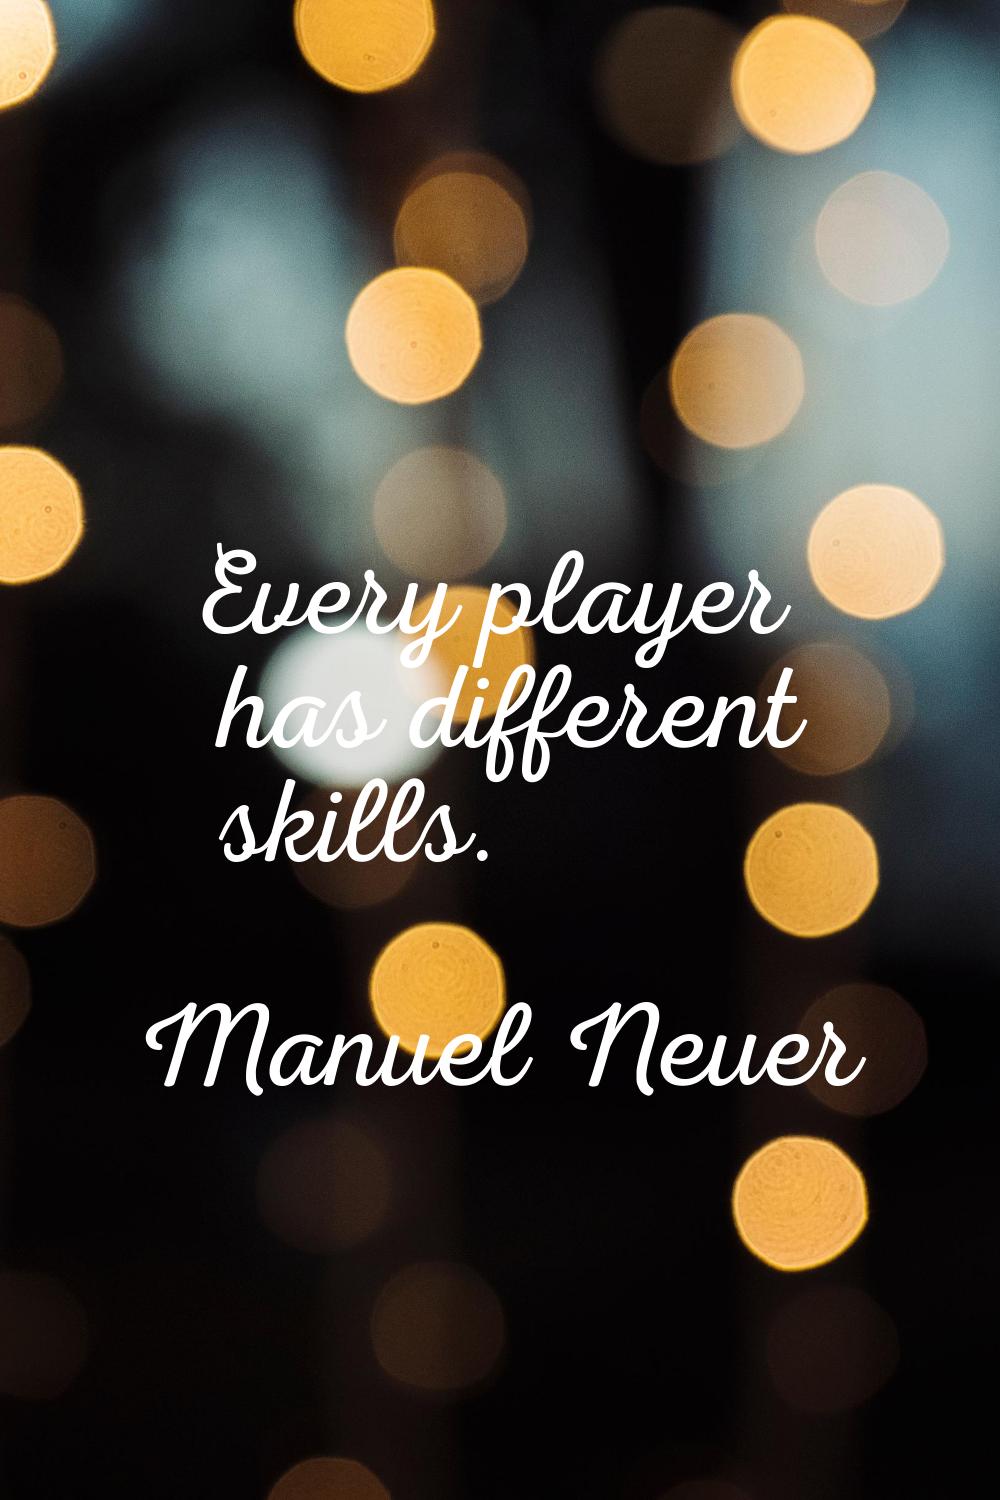 Every player has different skills.